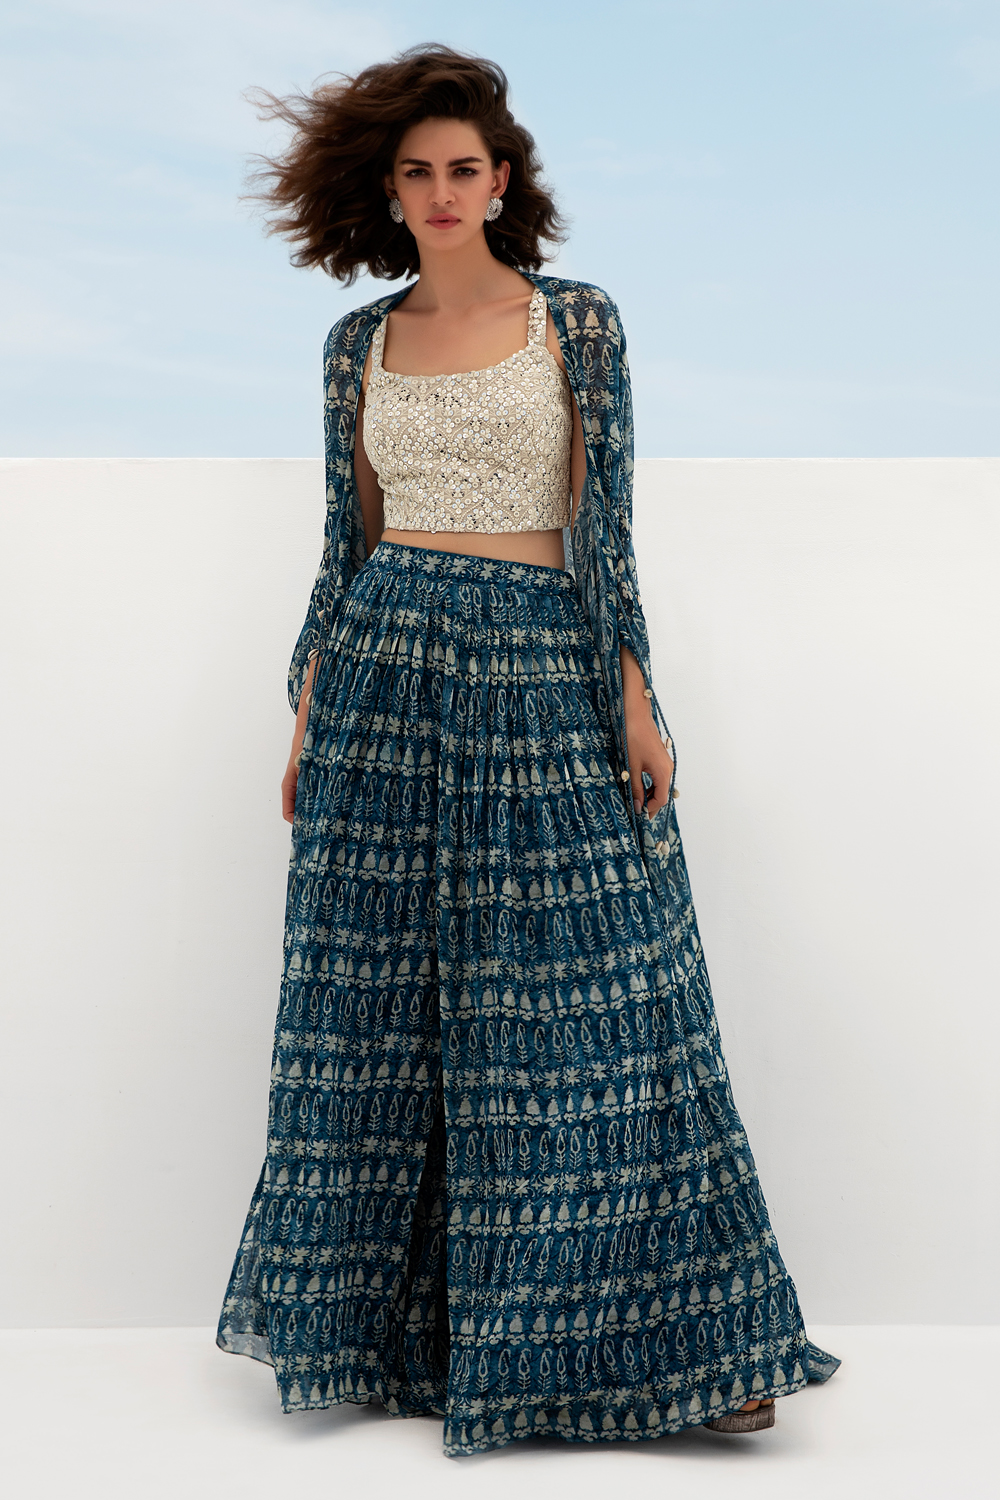 Crop Top, Palazzo Pants and a Jacket – New Occasion-Wear Wardrobe Essential  | Femina.in